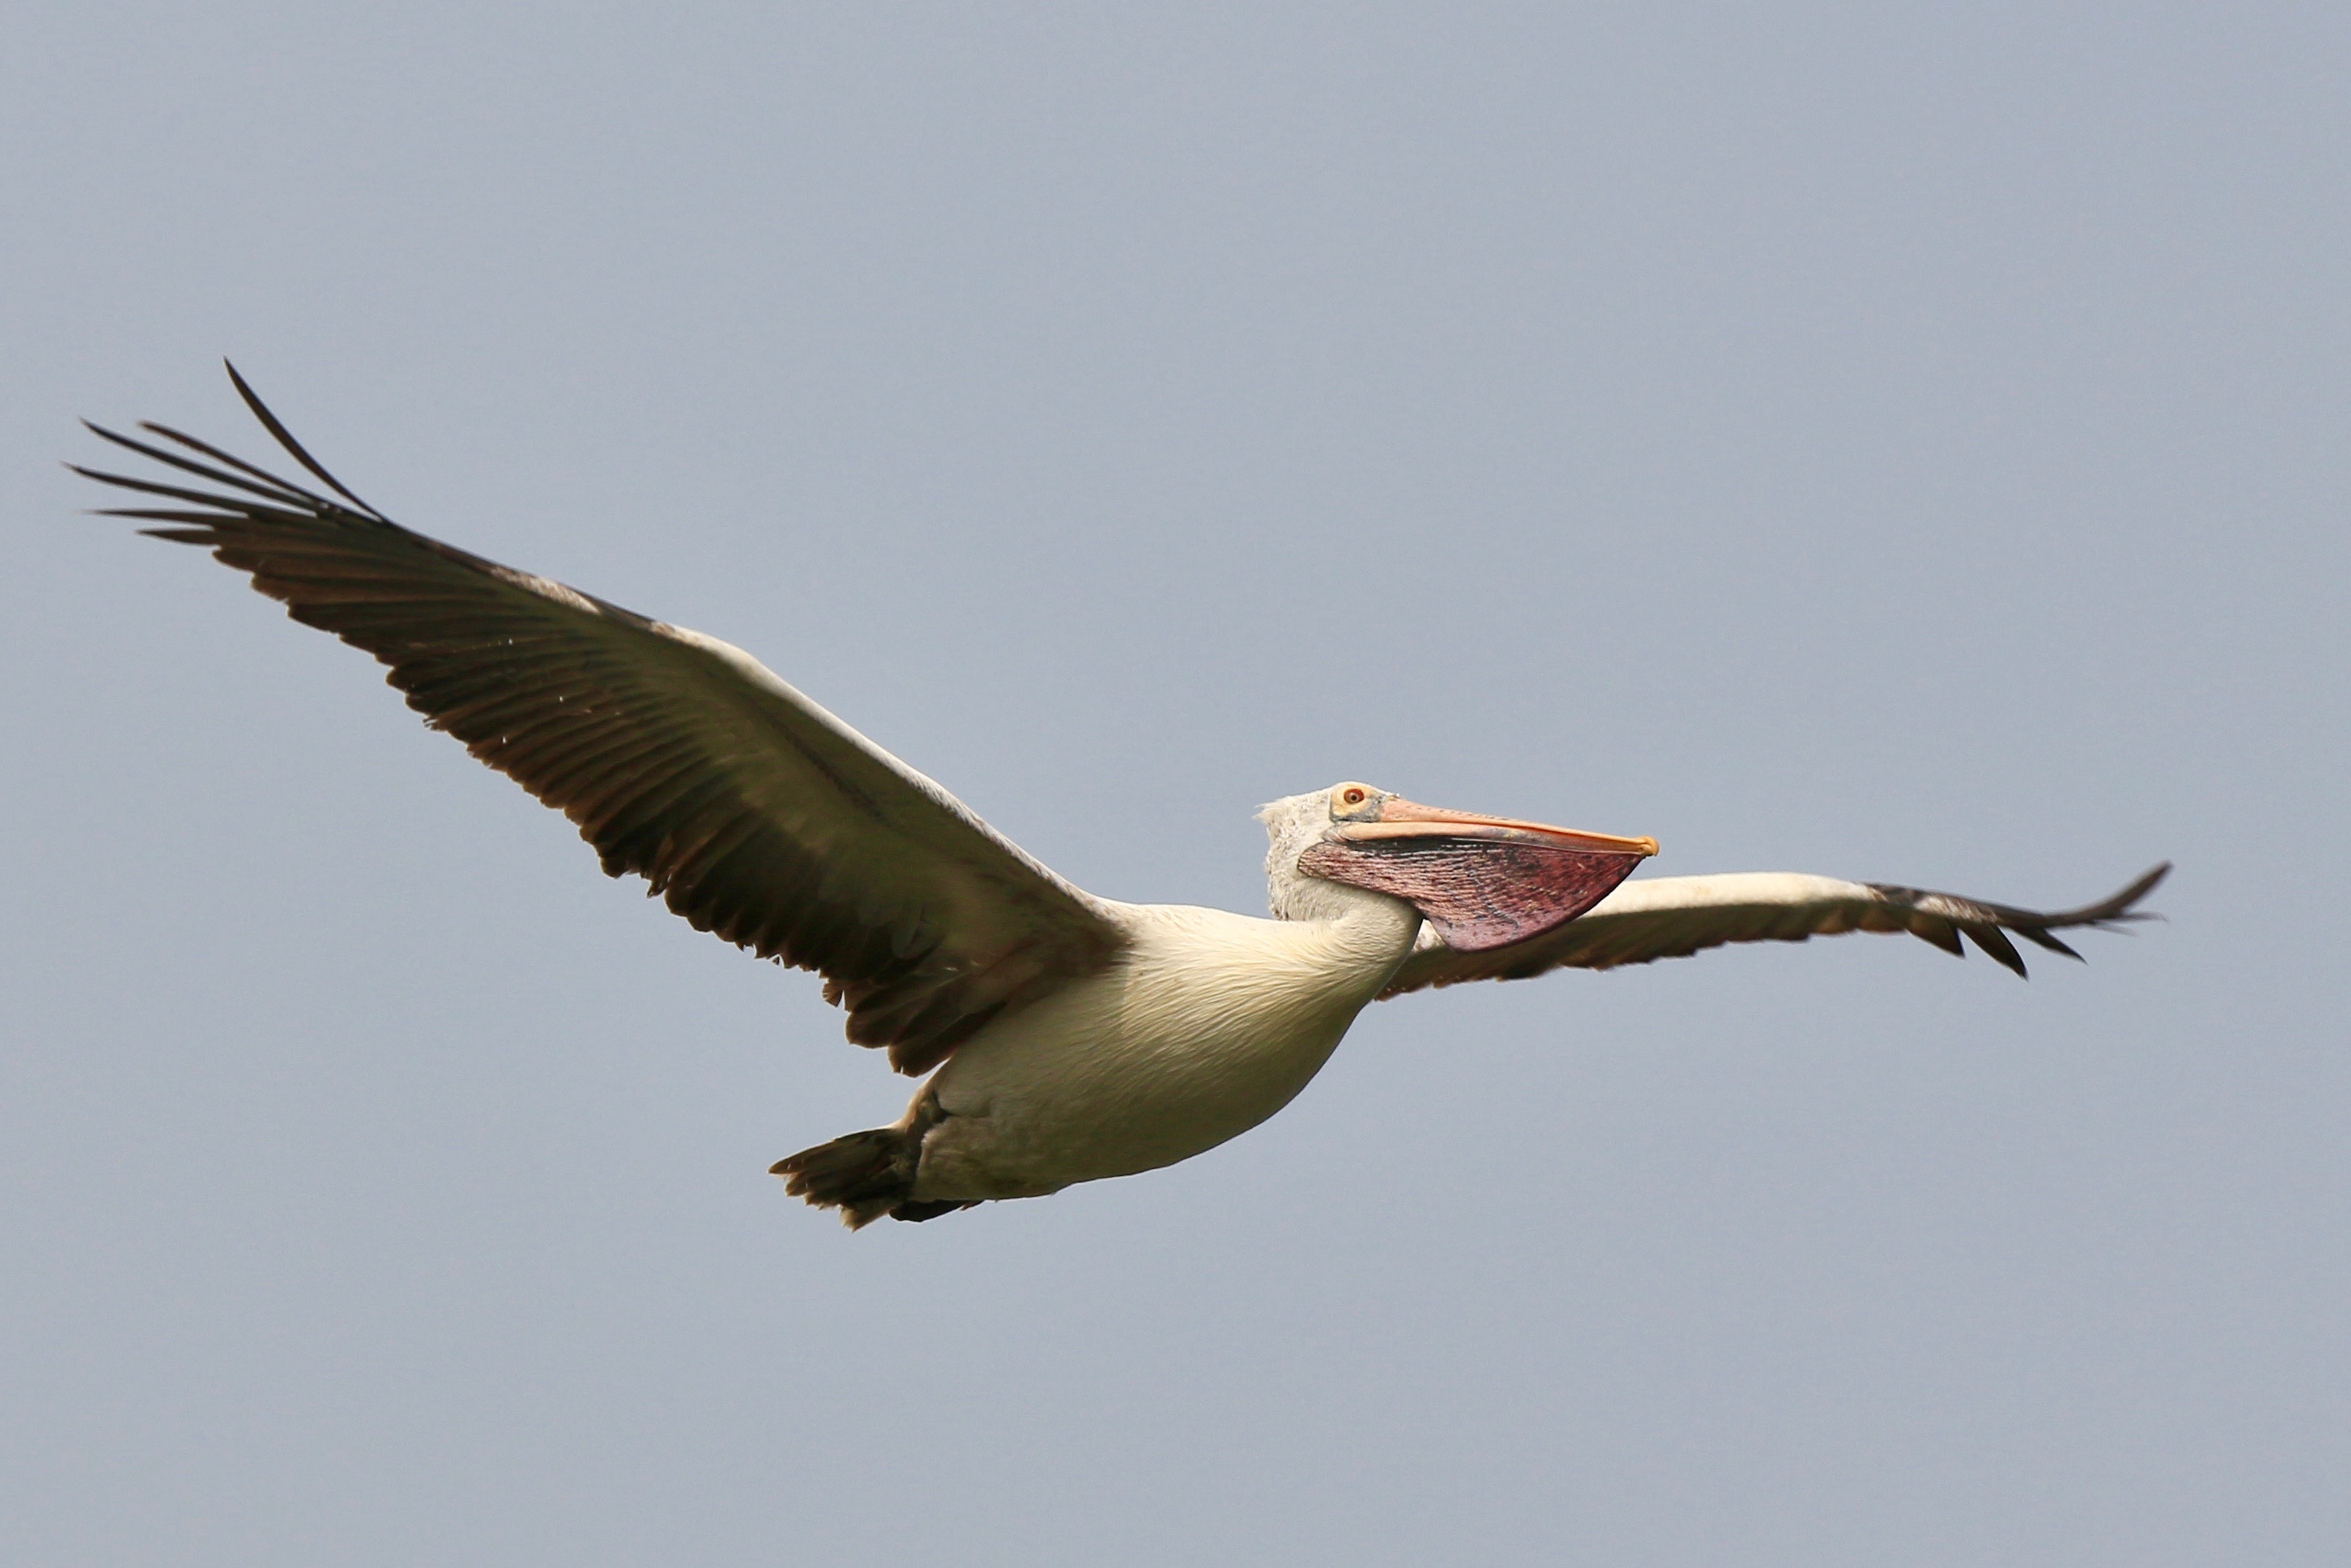 A spot-billed pelican soars in the airs with its wings spread directly outwards. It's a large white bird with the large throat pouch that is characteristic to pelican species. This pelican has a splotchy pink pouch and a pink and yellow bill. It looks sort of underslept because it has a pink ring of skin around its eyes and its legs are tucked under it while it flies.
